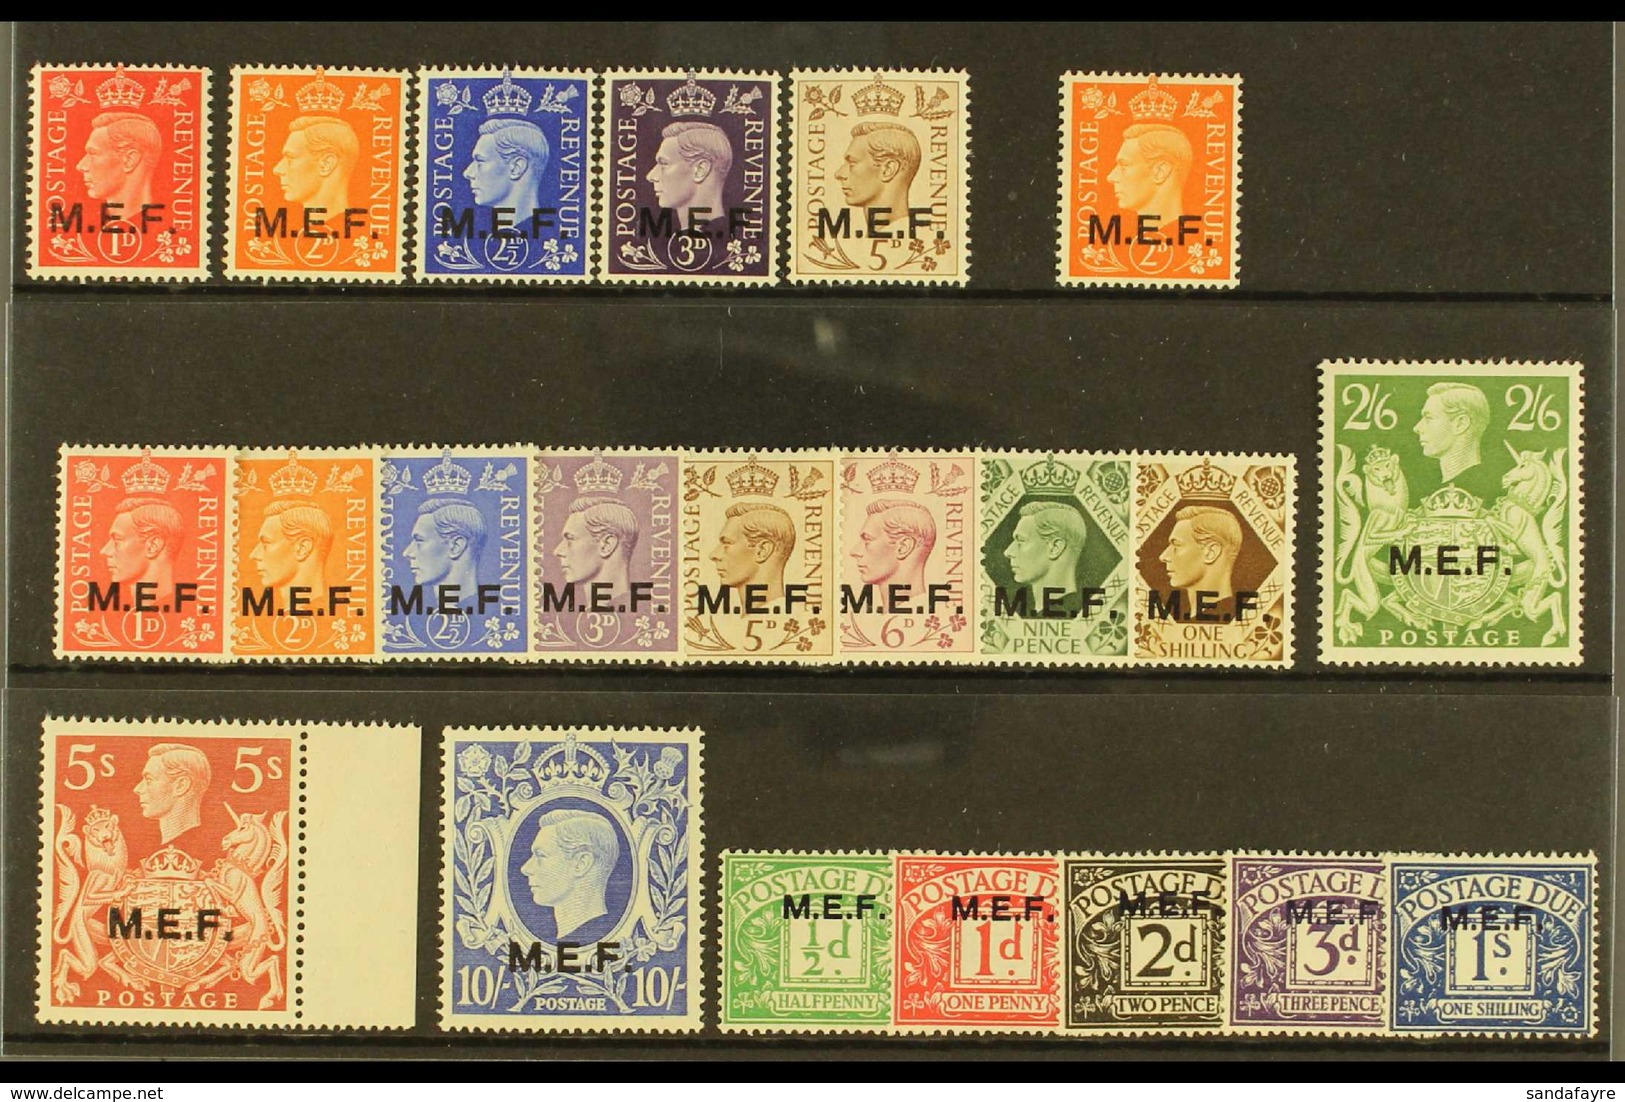 MIDDLE EAST FORCES 1942-47 FINE MINT COLLECTION On A Stock Card That Includes 1942 "Type I" Opt'd Set, "Type II" Opt'd 2 - Italian Eastern Africa